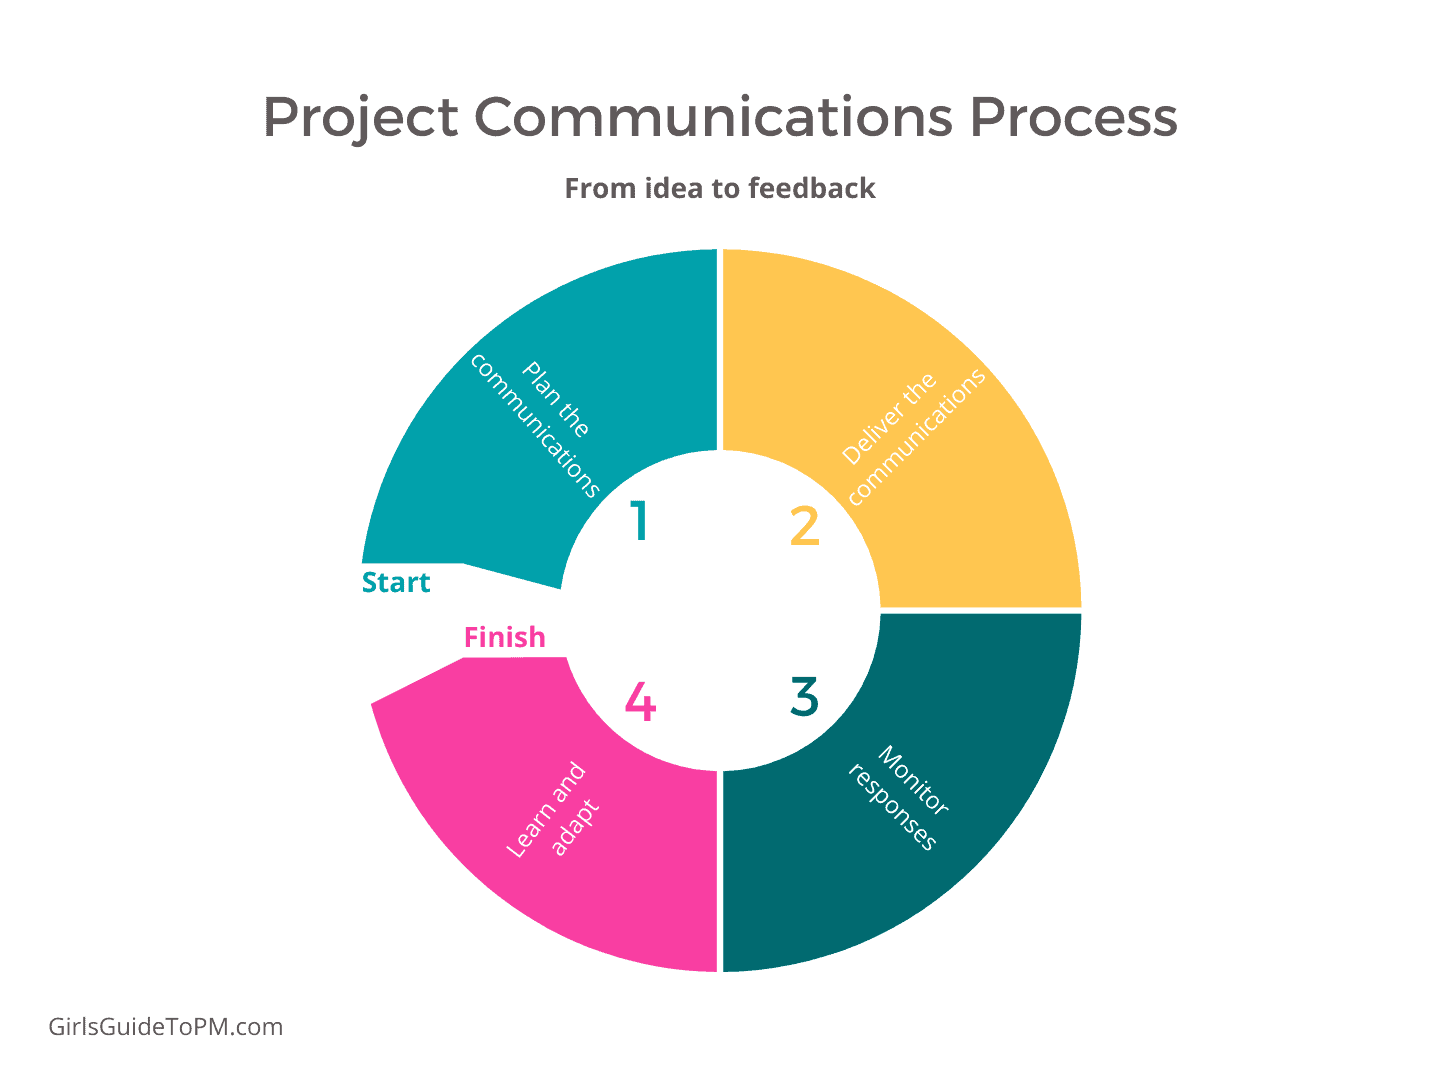 Process diagram showing project communications process including the steps plan, deliver, monitor and learn and adapt